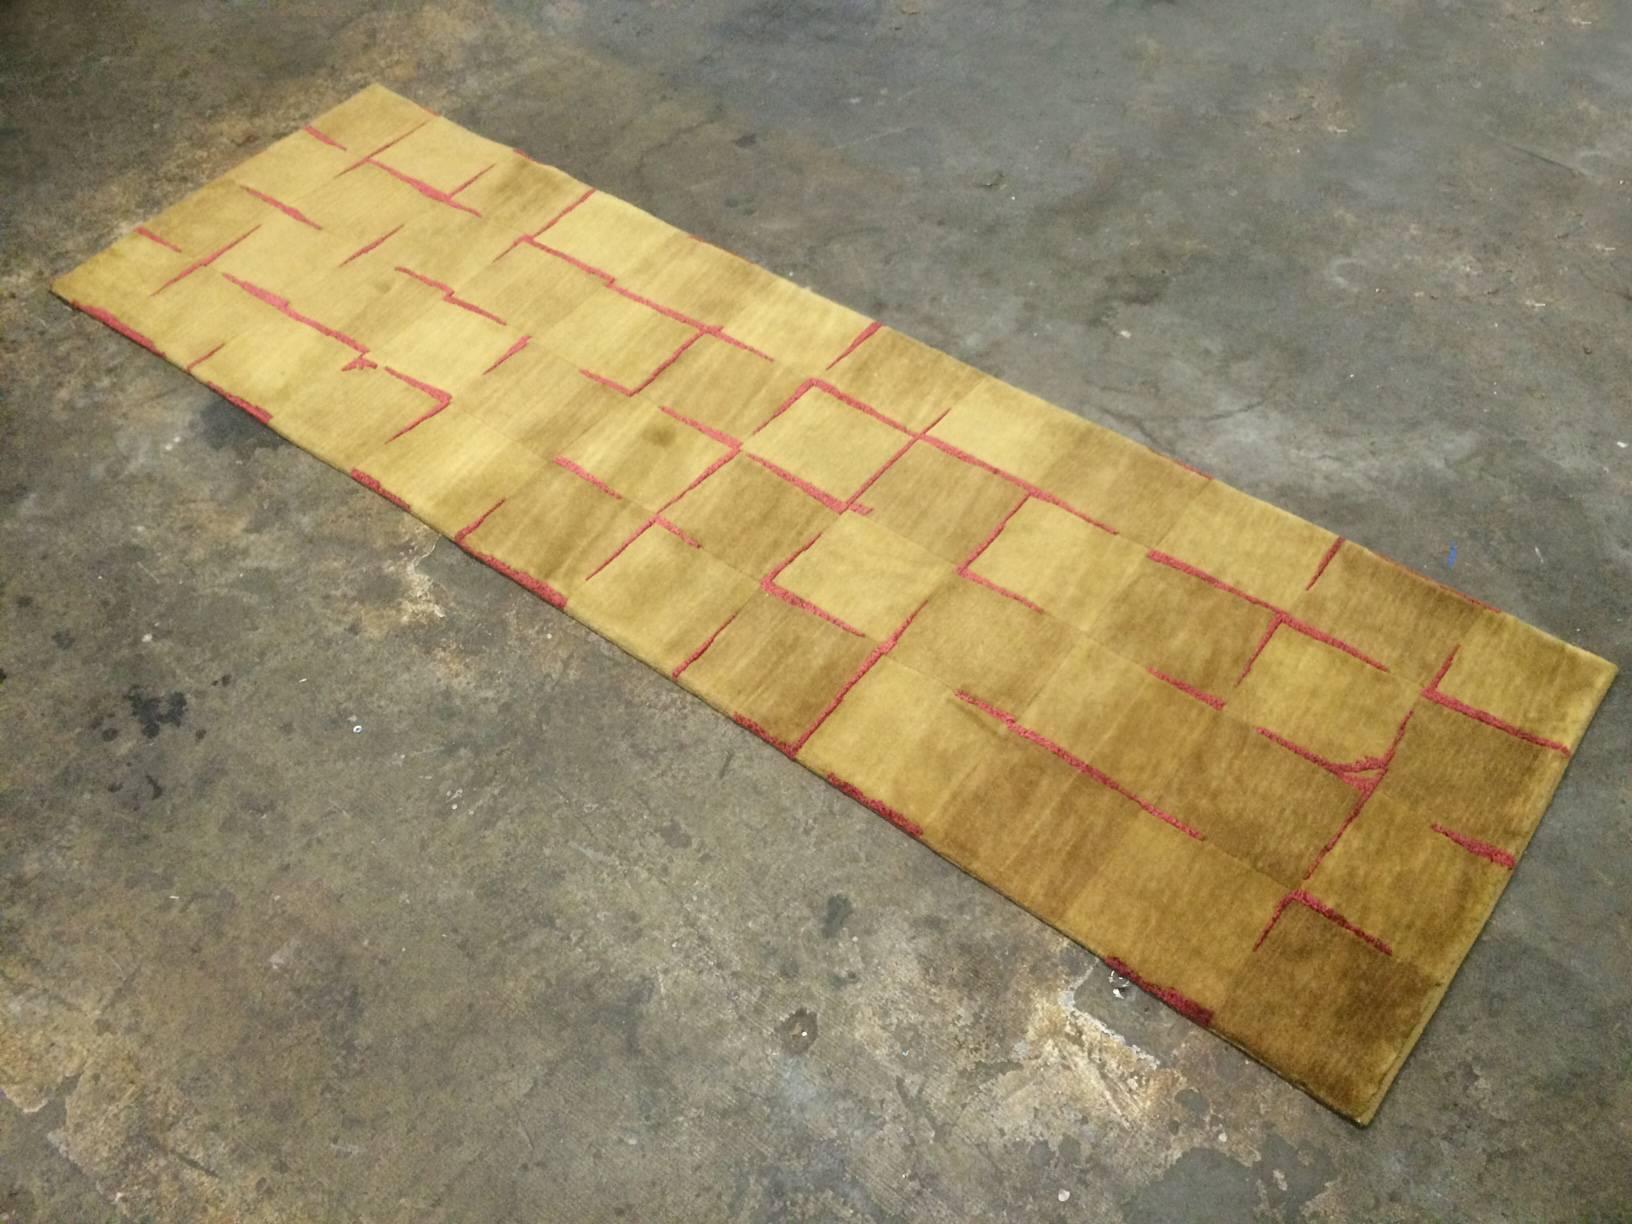 This handmade Pakistani runner is made using two different types of wool. The pattern is based on an image of tiles or stone blocks with the red wool taking on the role of grout.